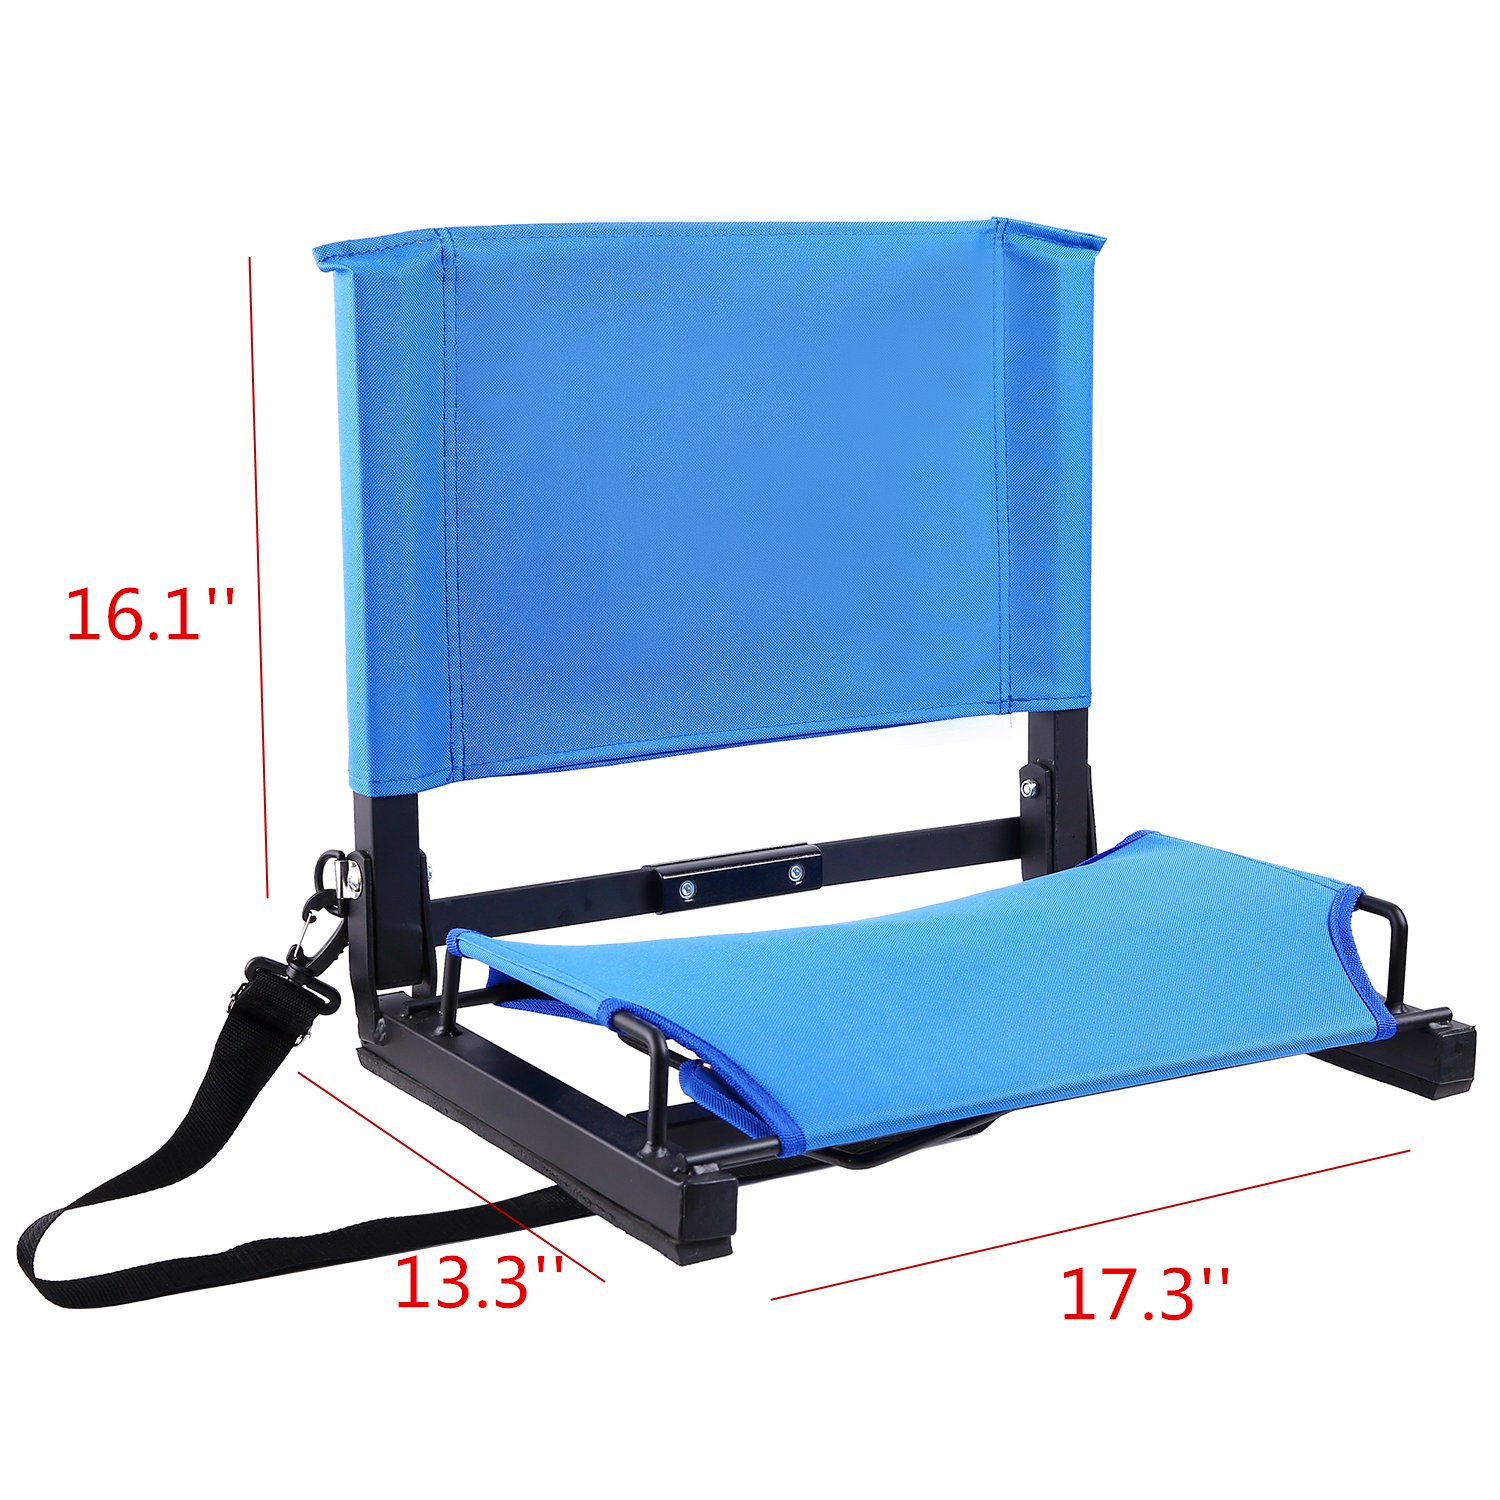 Comfortable Folding Stadium Seat, Outdoor Padded Seat Cushion for